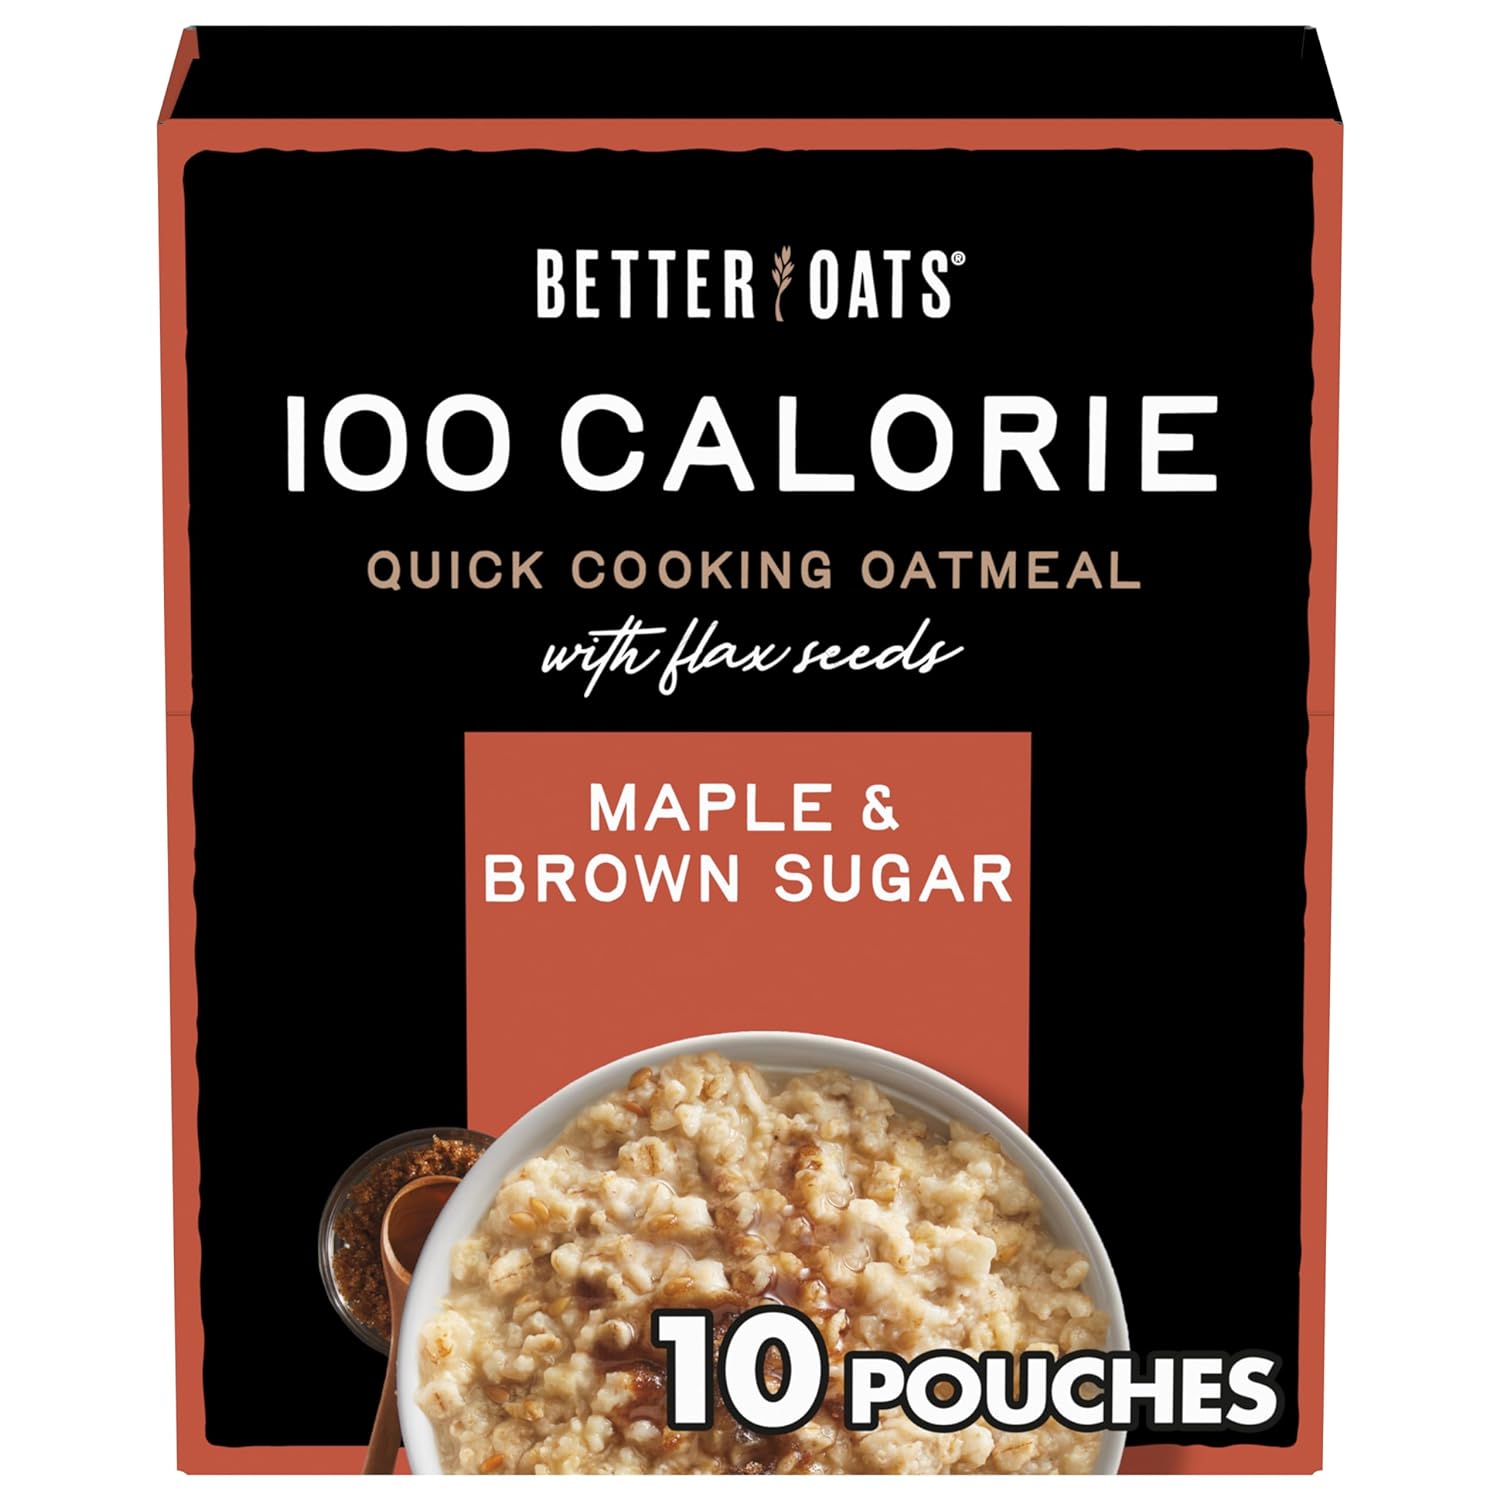 Better Oats 100 Calorie Maple and Brown Sugar Oatmeal Packets, 100 Calorie Oatmeal Pouches, 90 Second Instant Oatmeal with Flax Seeds and Rolled Oats, Pack of 6, 9.8 OZ Pack